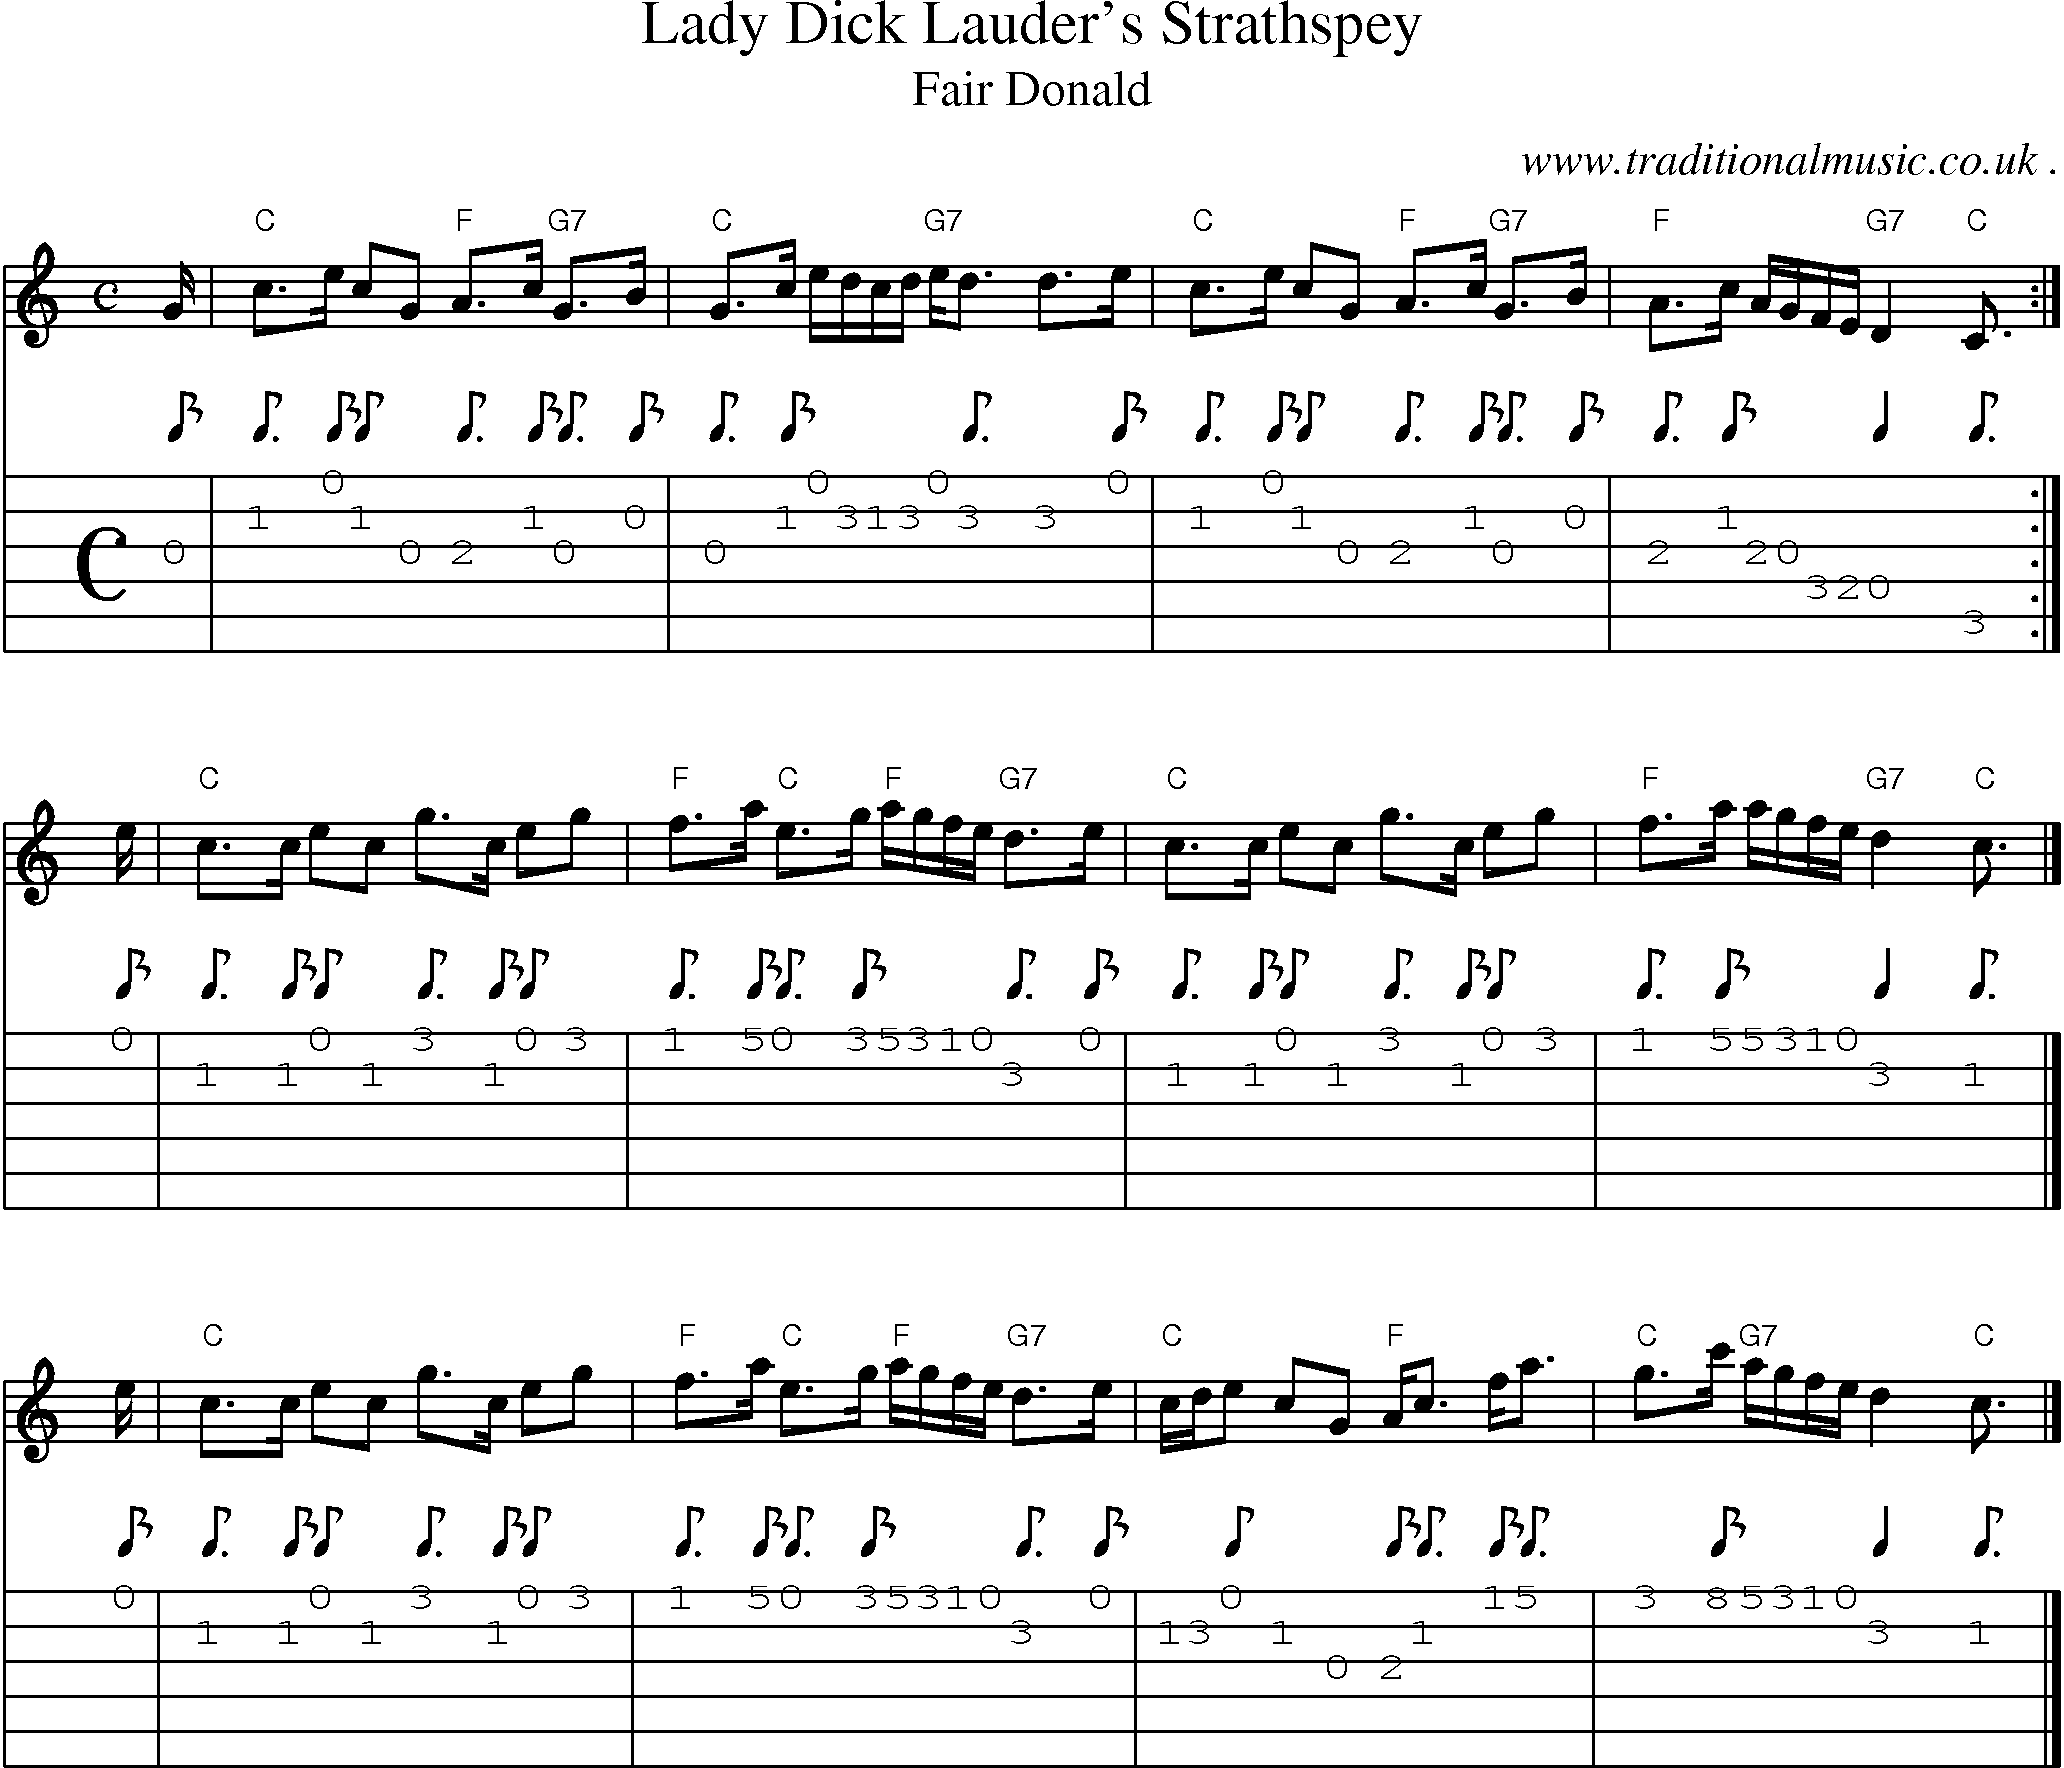 Sheet-music  score, Chords and Guitar Tabs for Lady Dick Lauders Strathspey